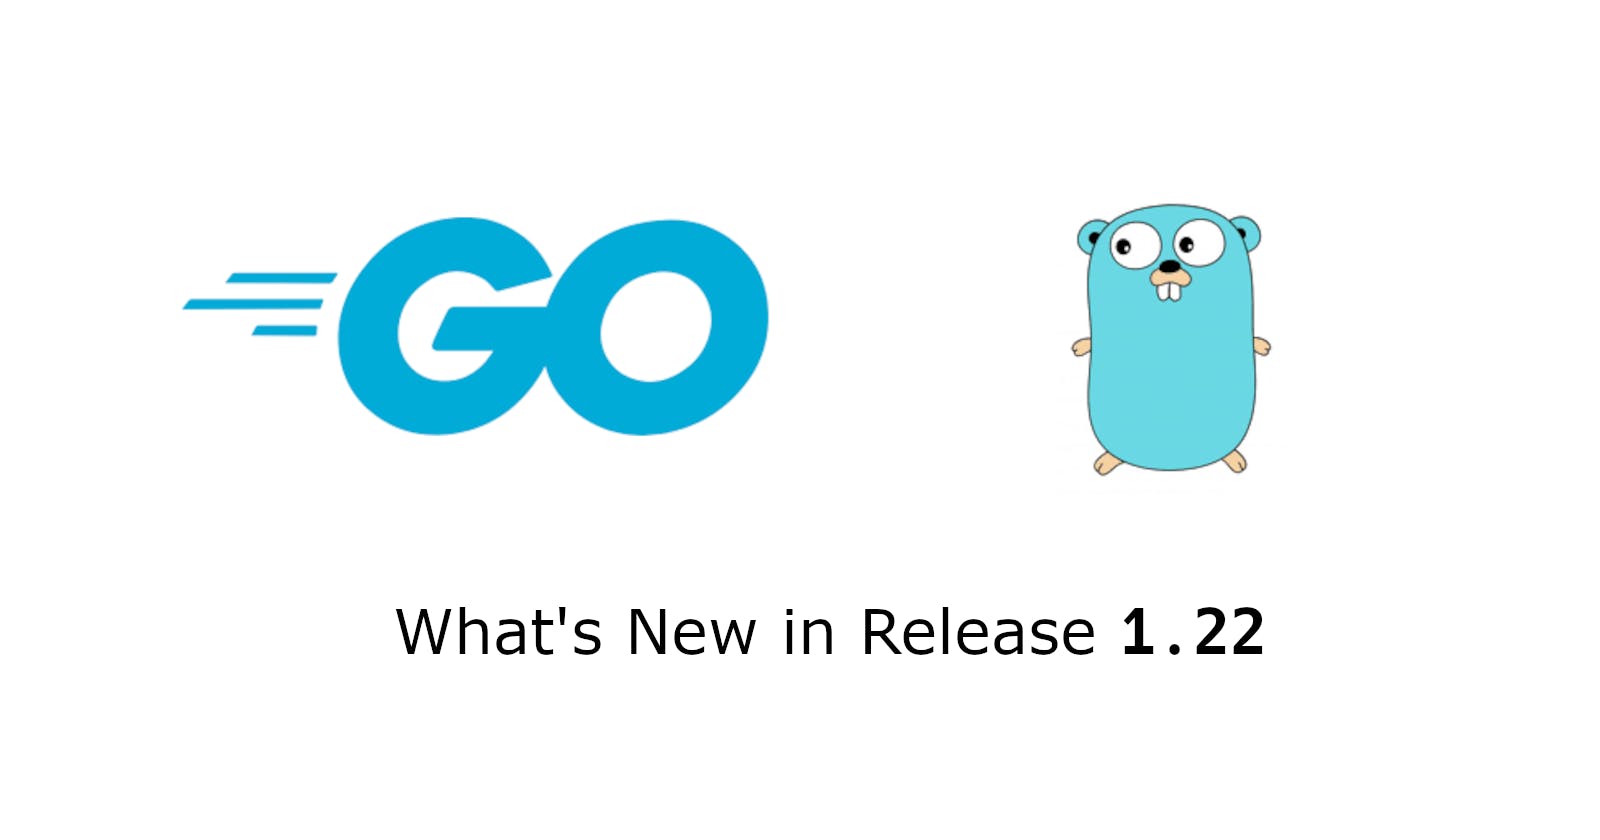 Whats new in Golang 1.22?